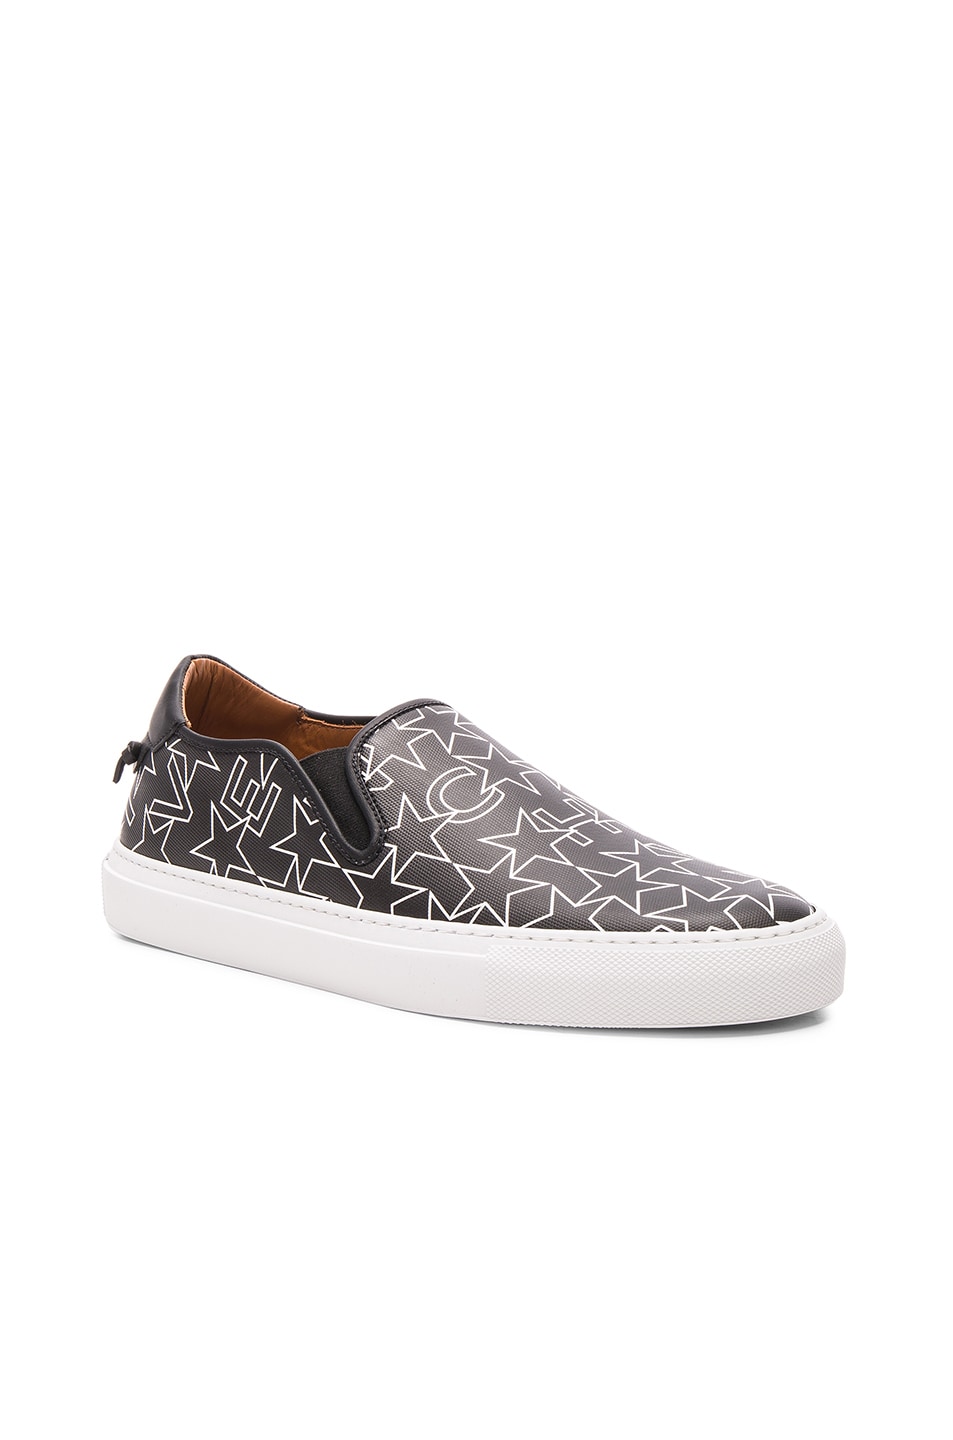 Image 1 of Givenchy Coated Canvas Street Skate Sneakers in Black & White